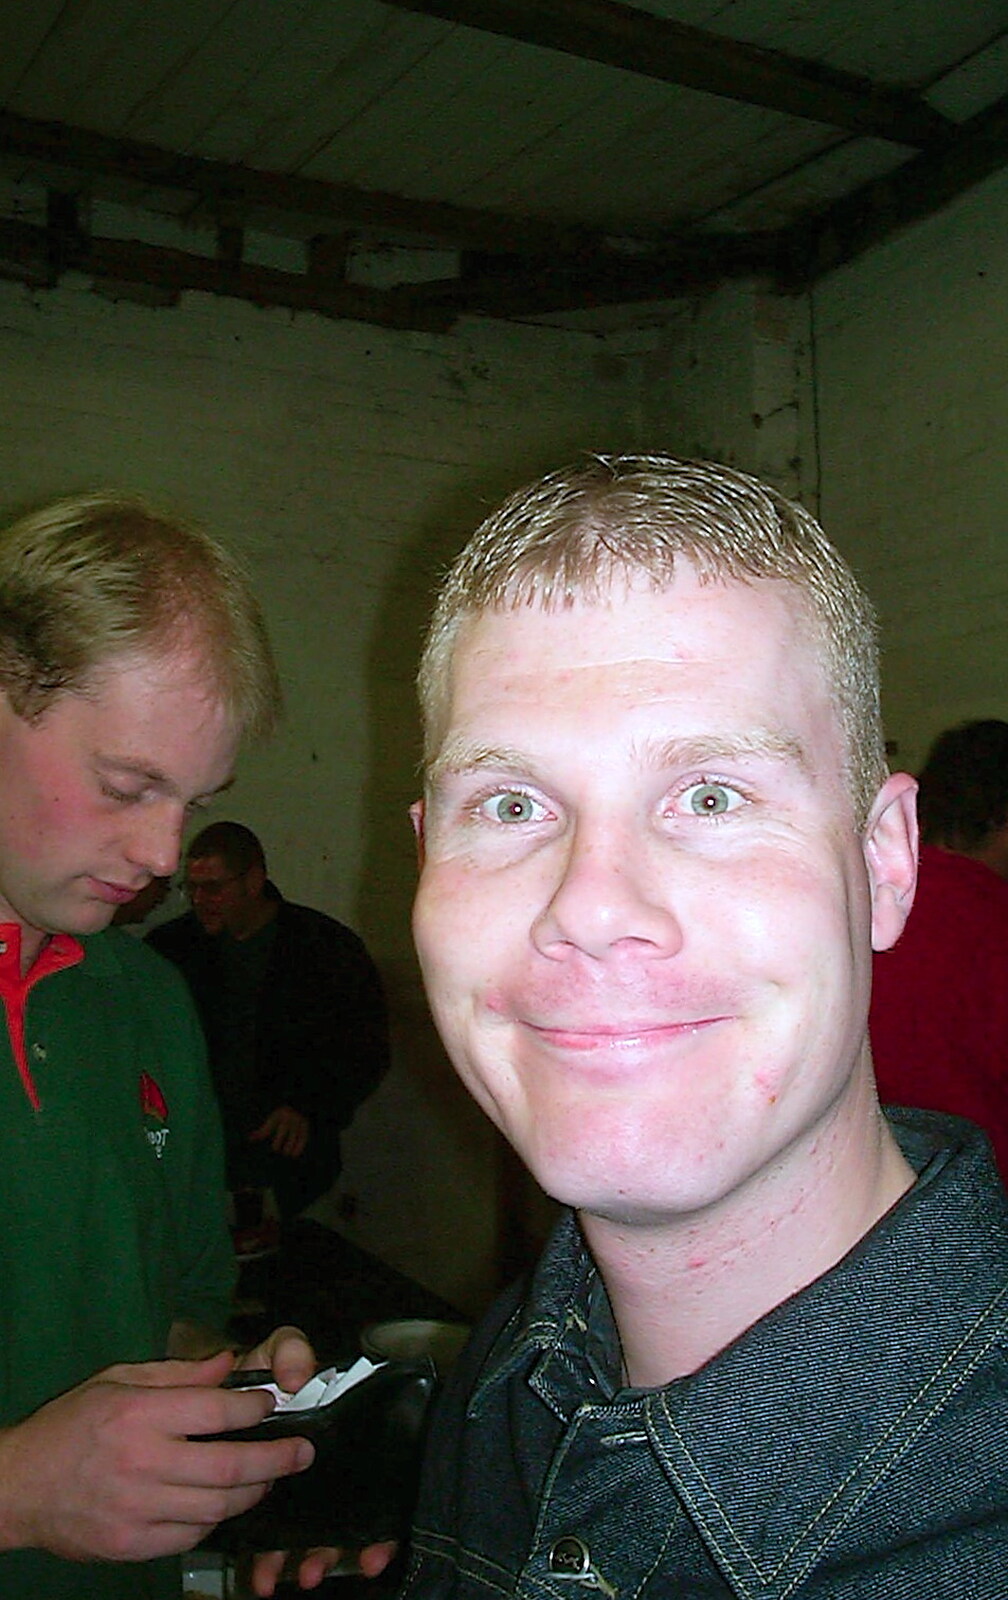 Mikey P from The Hoxne Beer Festival, Suffolk - 20th May 2002